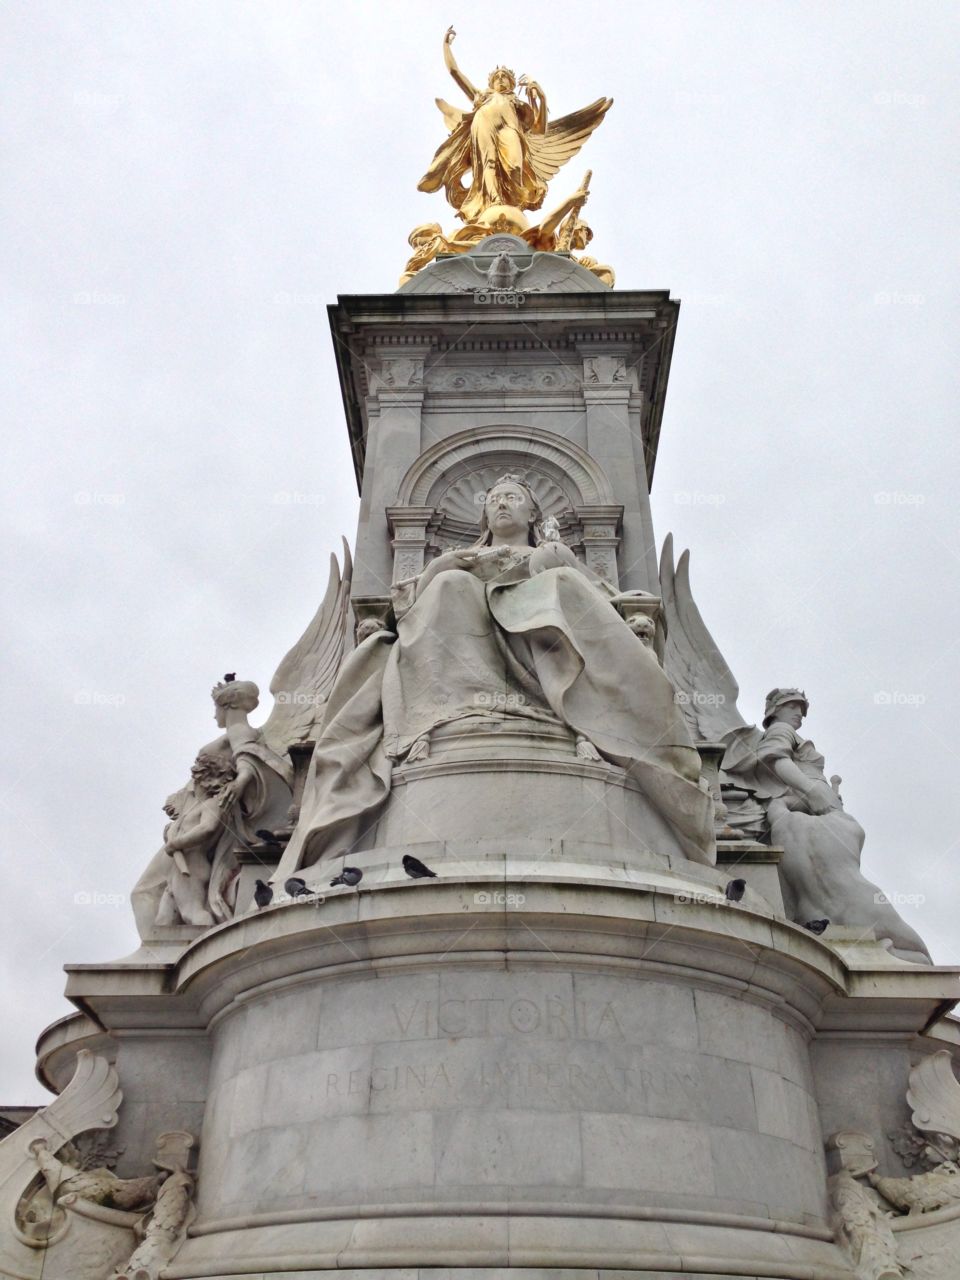 Our lady queen Victoria 